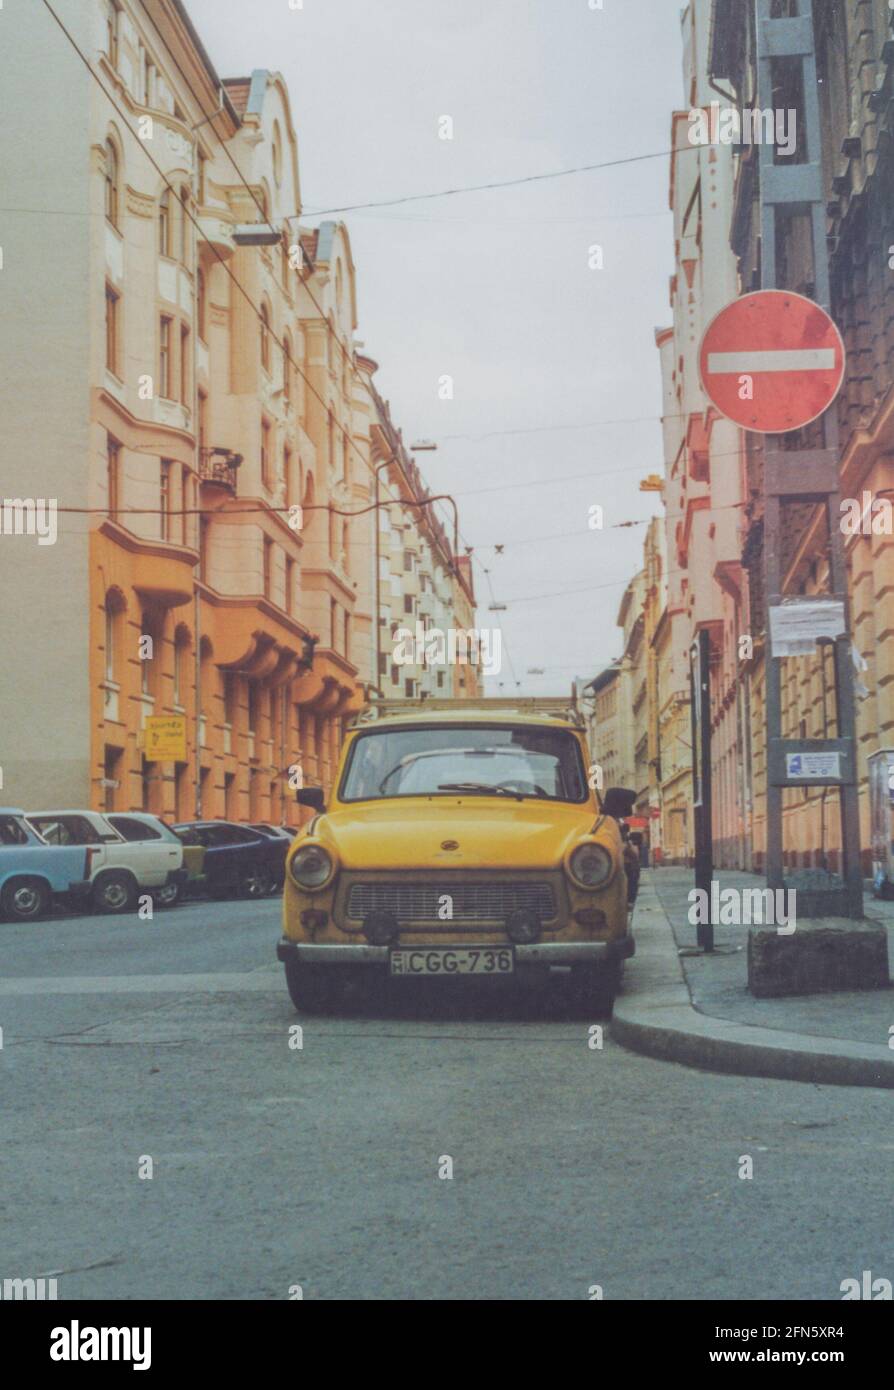 A yellow East German Trabant car or also known as Trabbi parked in a street in Budapest, Hungary, Europe - archival image Stock Photo